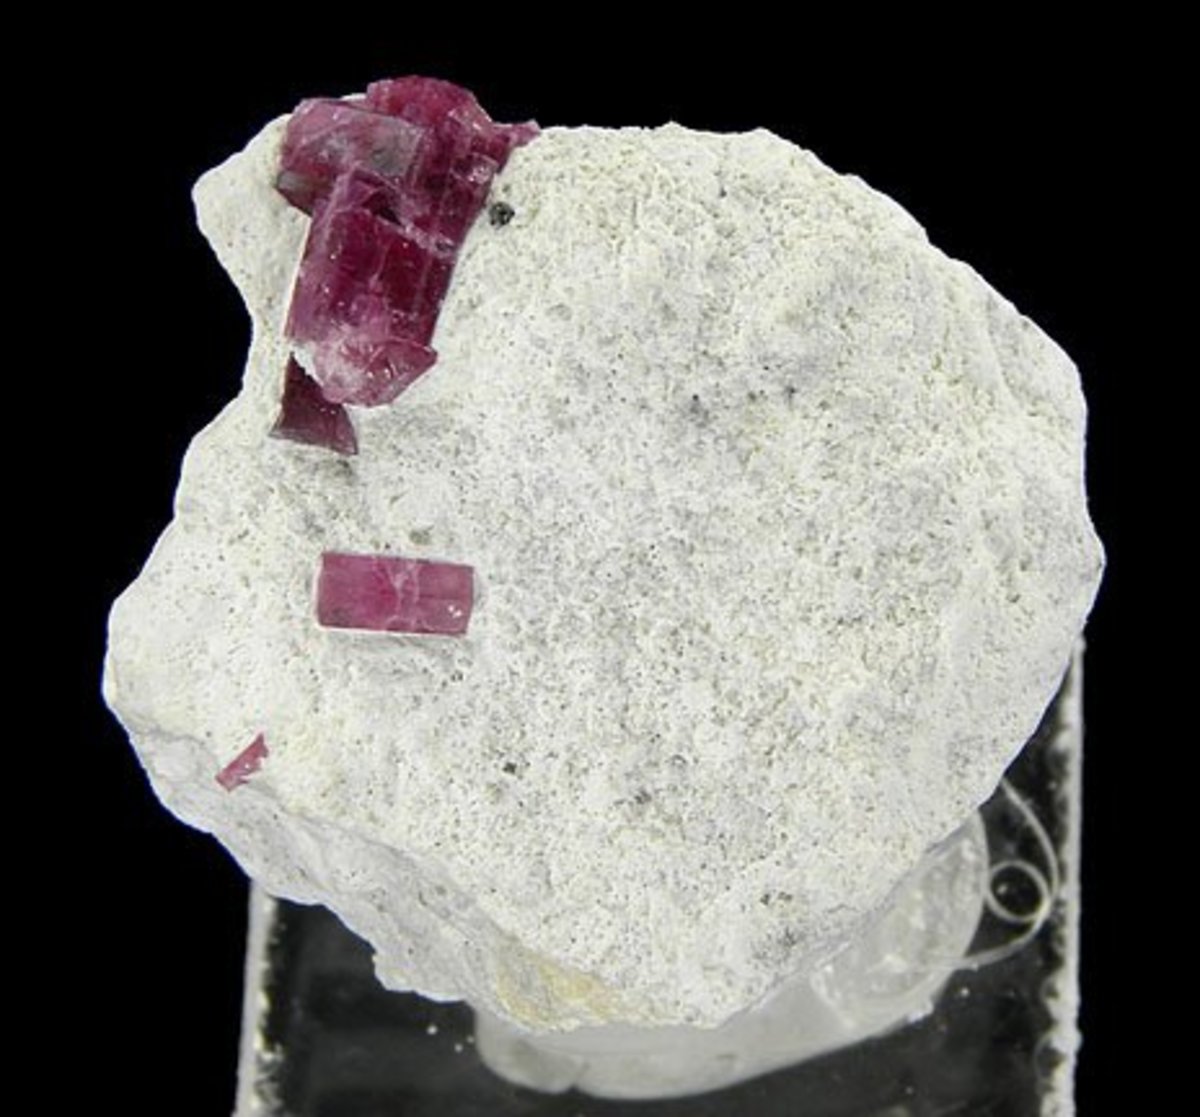 Red Beryl:  One of the rarest gemstones in the world